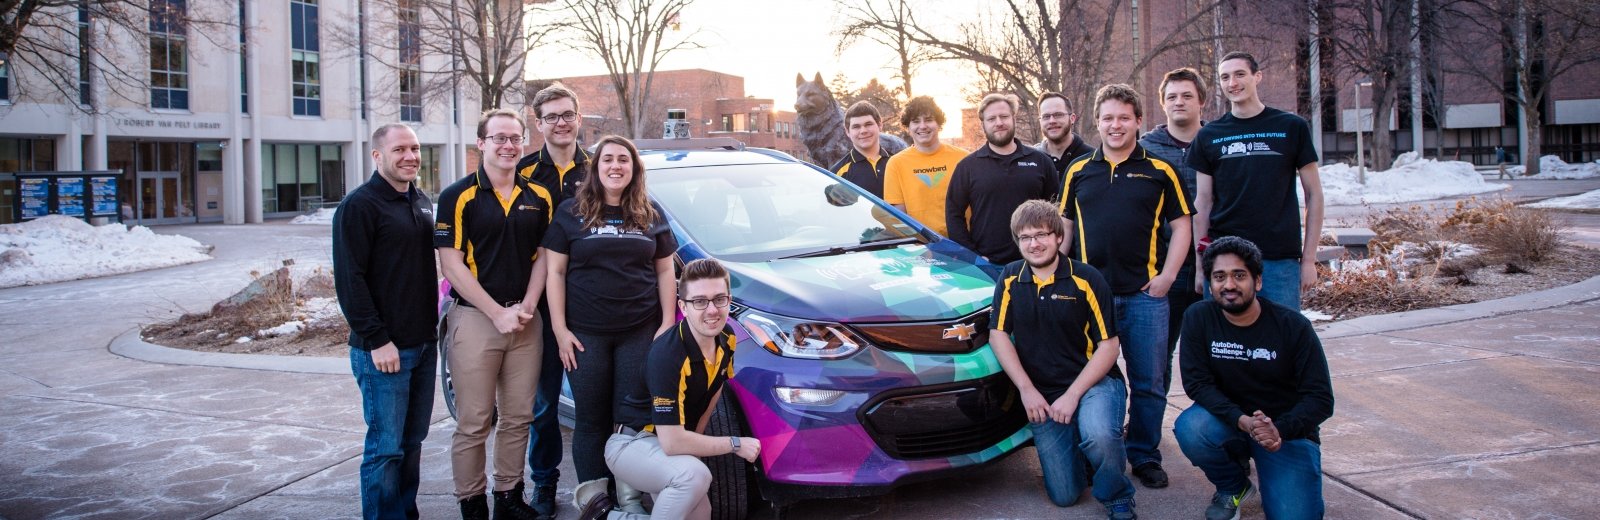 Named for the Greek deities of knowledge, learning, and the north wind, Michigan Techâ€™s Prometheus Borealis team placed second in concept design and eighth overall in the inaugural competition of the AutoDrive Challenge, held April and May 2018 in Yuma, Arizona. The AutoDrive Challenge is a three-year collegiate autonomous vehicle design competition sponsored by SAE International and GM.